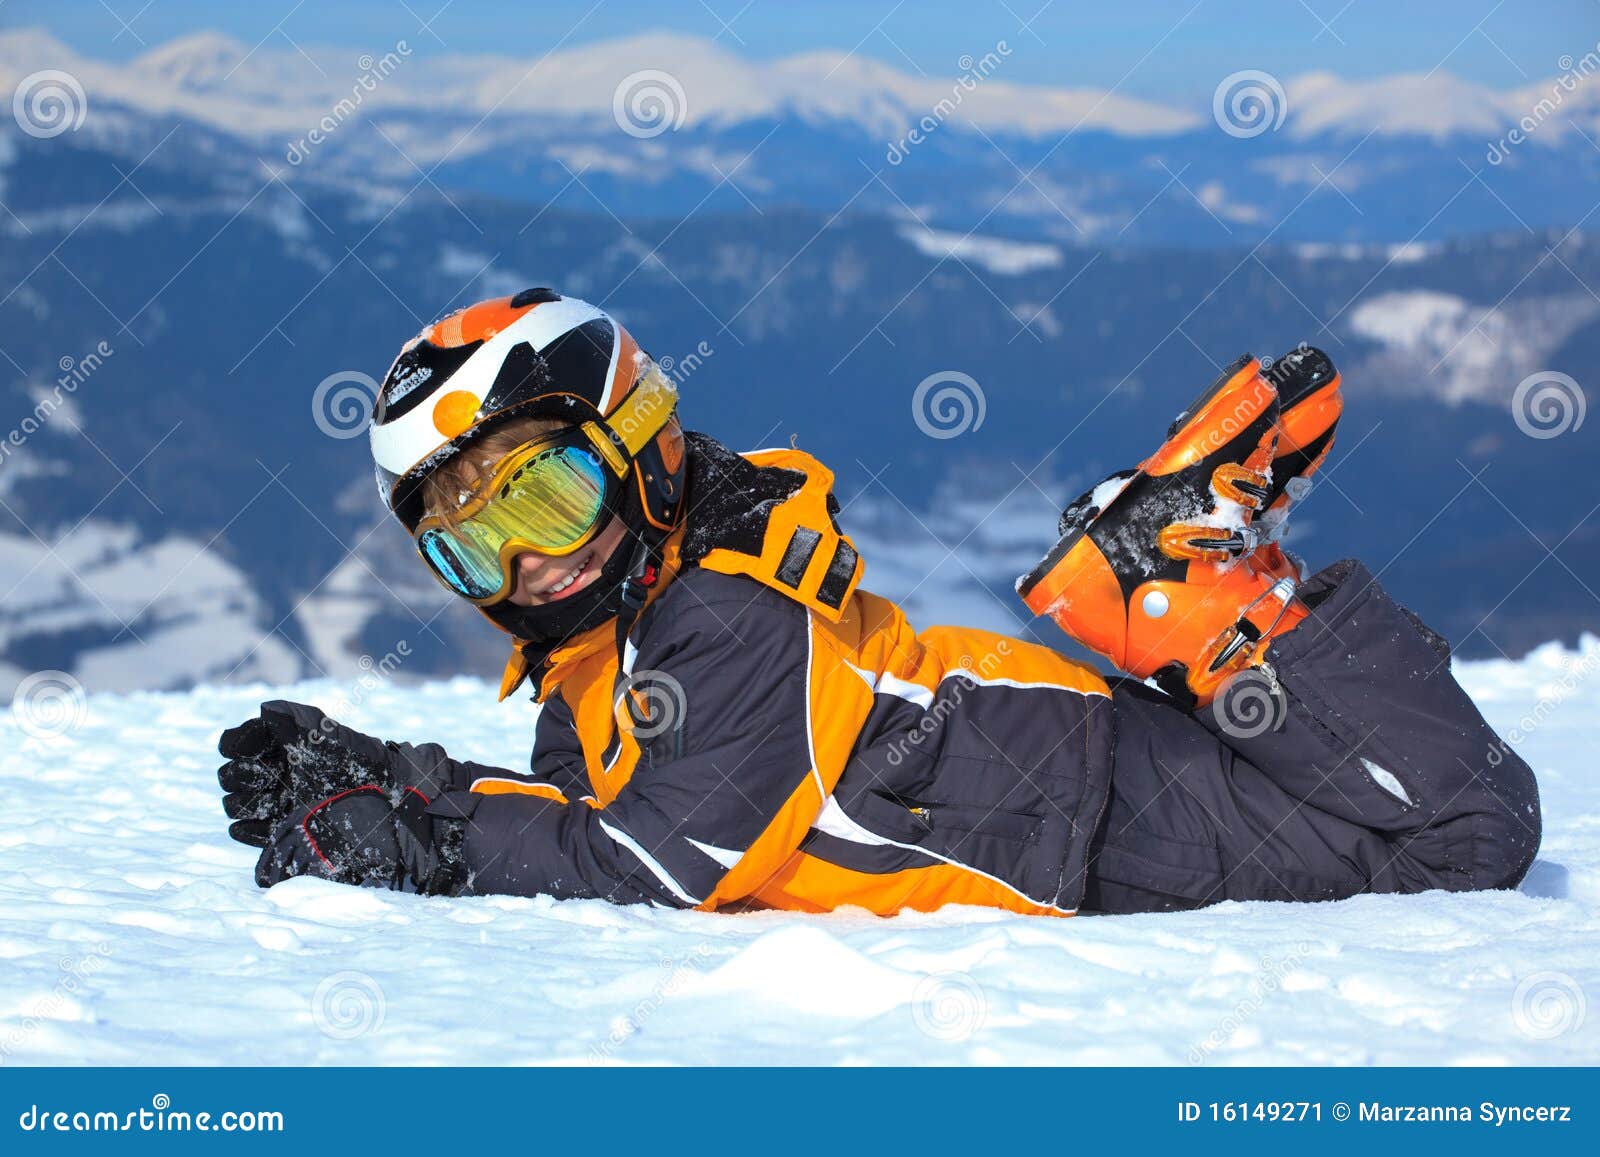 Boy with Ski Clothes in Alps Stock Image - Image of closeup, frozen ...